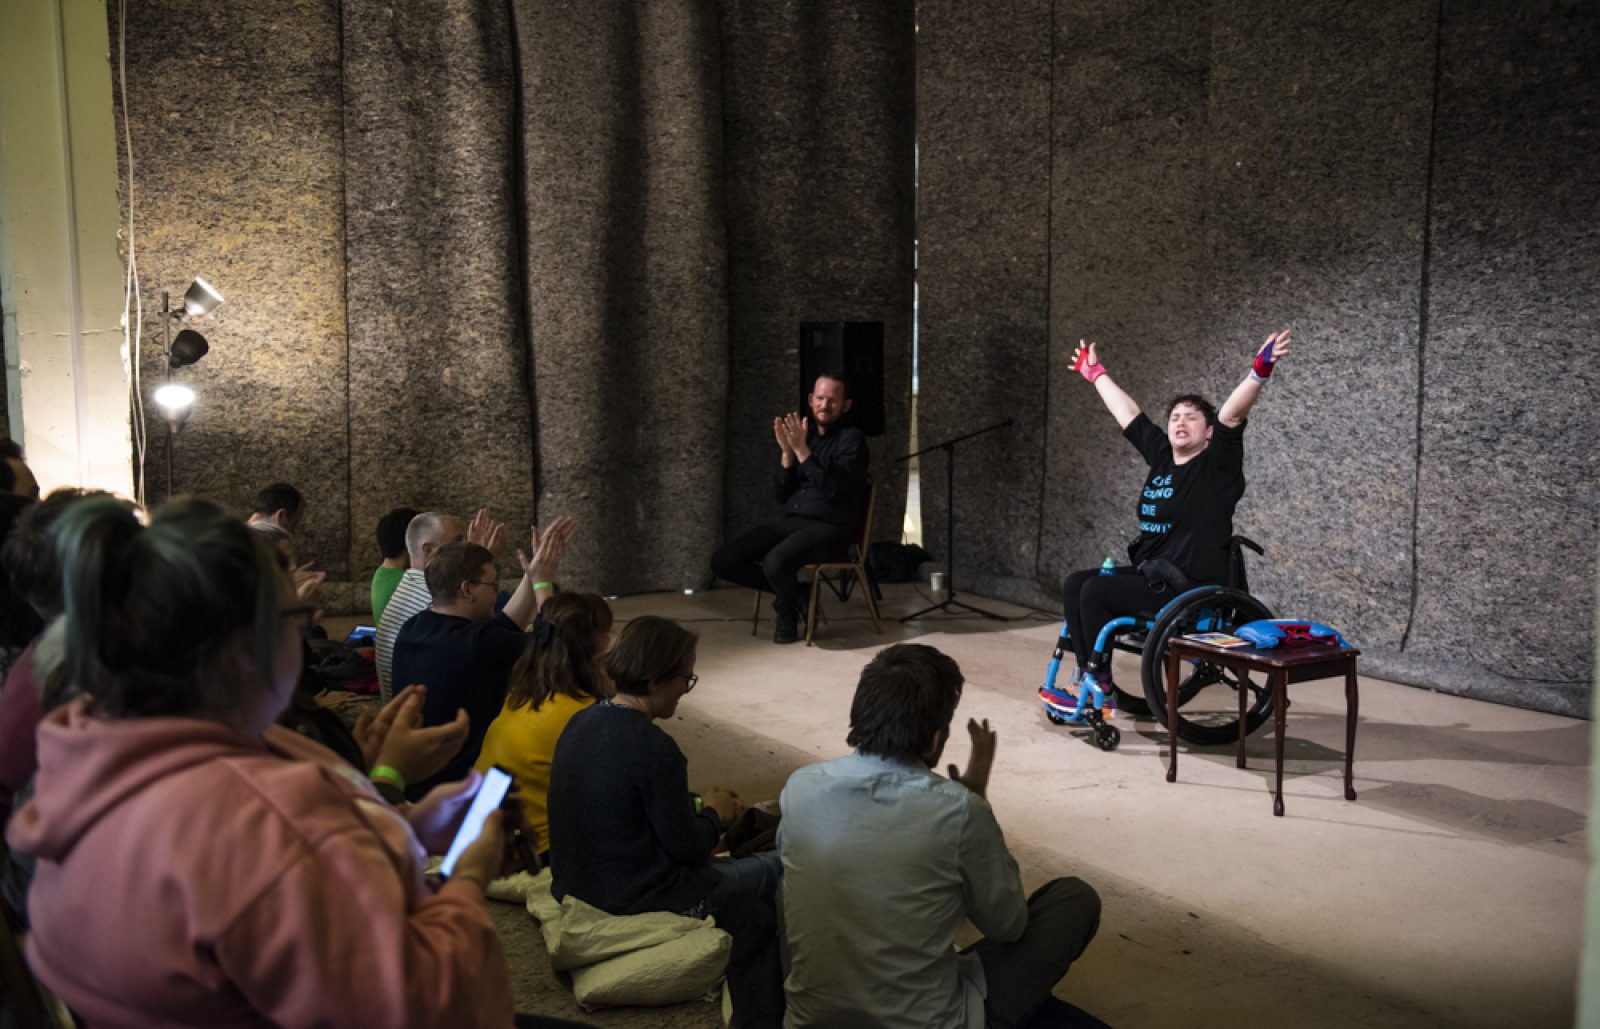 A person in a manual wheelchair is on stage with their hands in the air. An audience of people watch and clap.